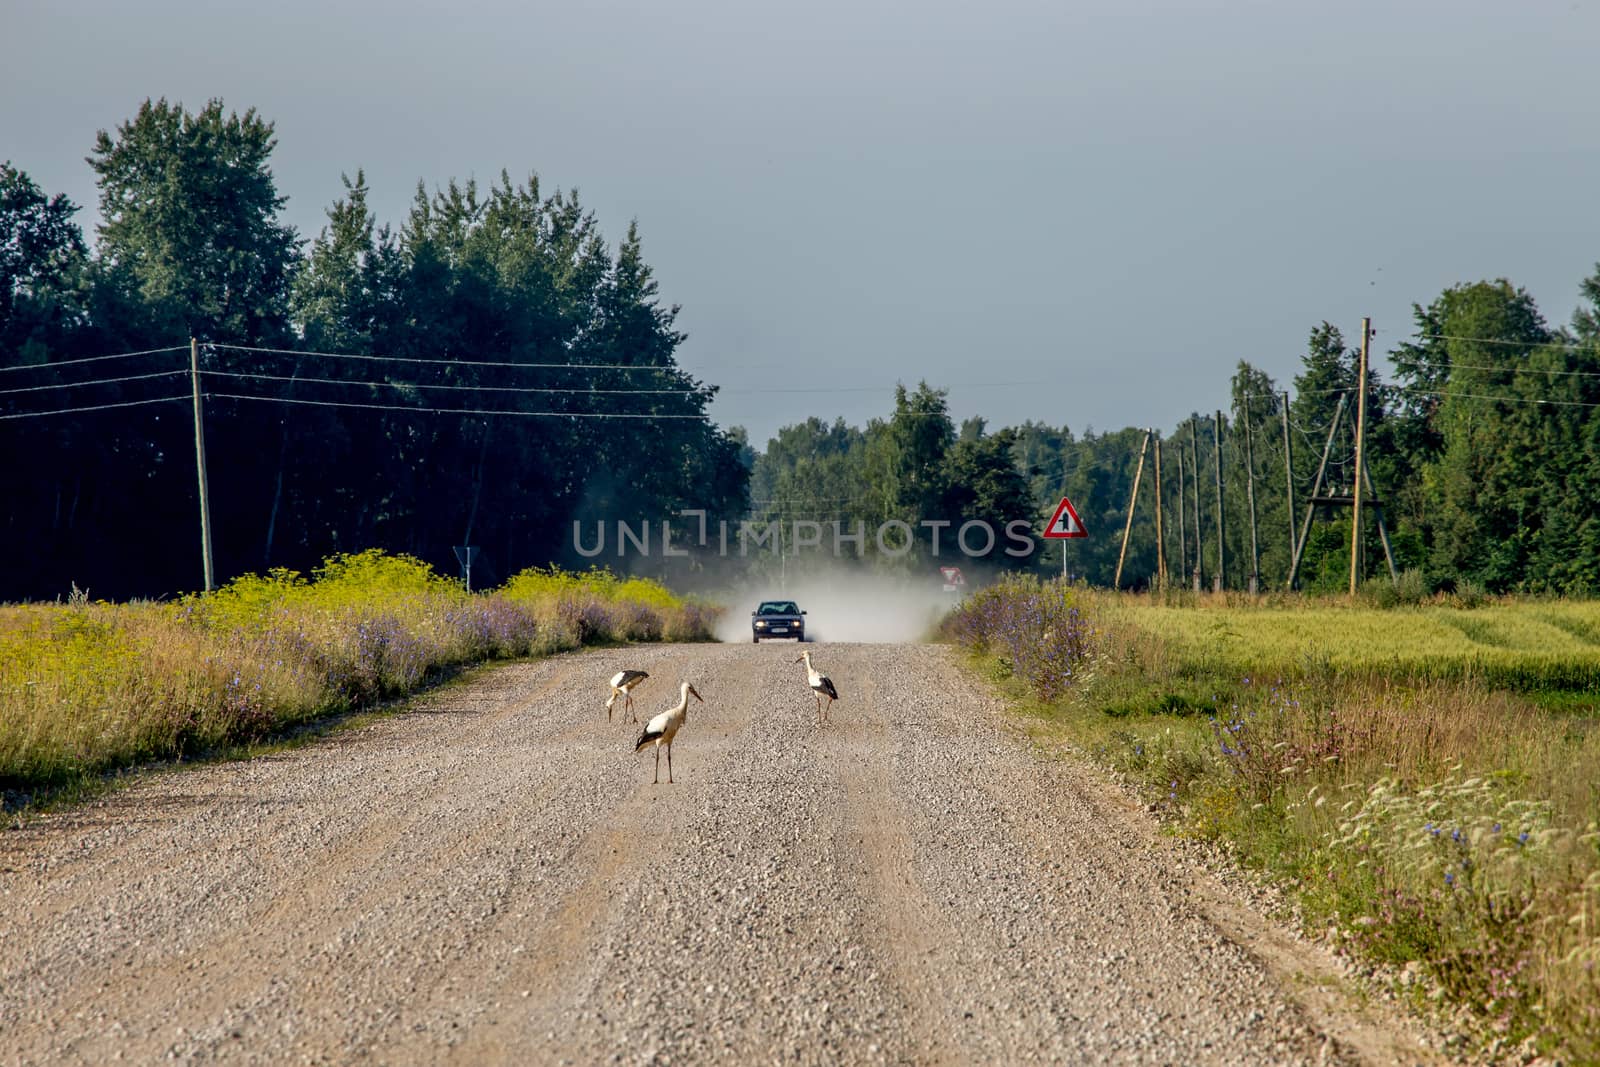 Summer landscape with car and storks on countryside  road. Rural road, cornfield, wood and cloudy blue sky. Car and storks on rural road. Classic rural landscape in Latvia.